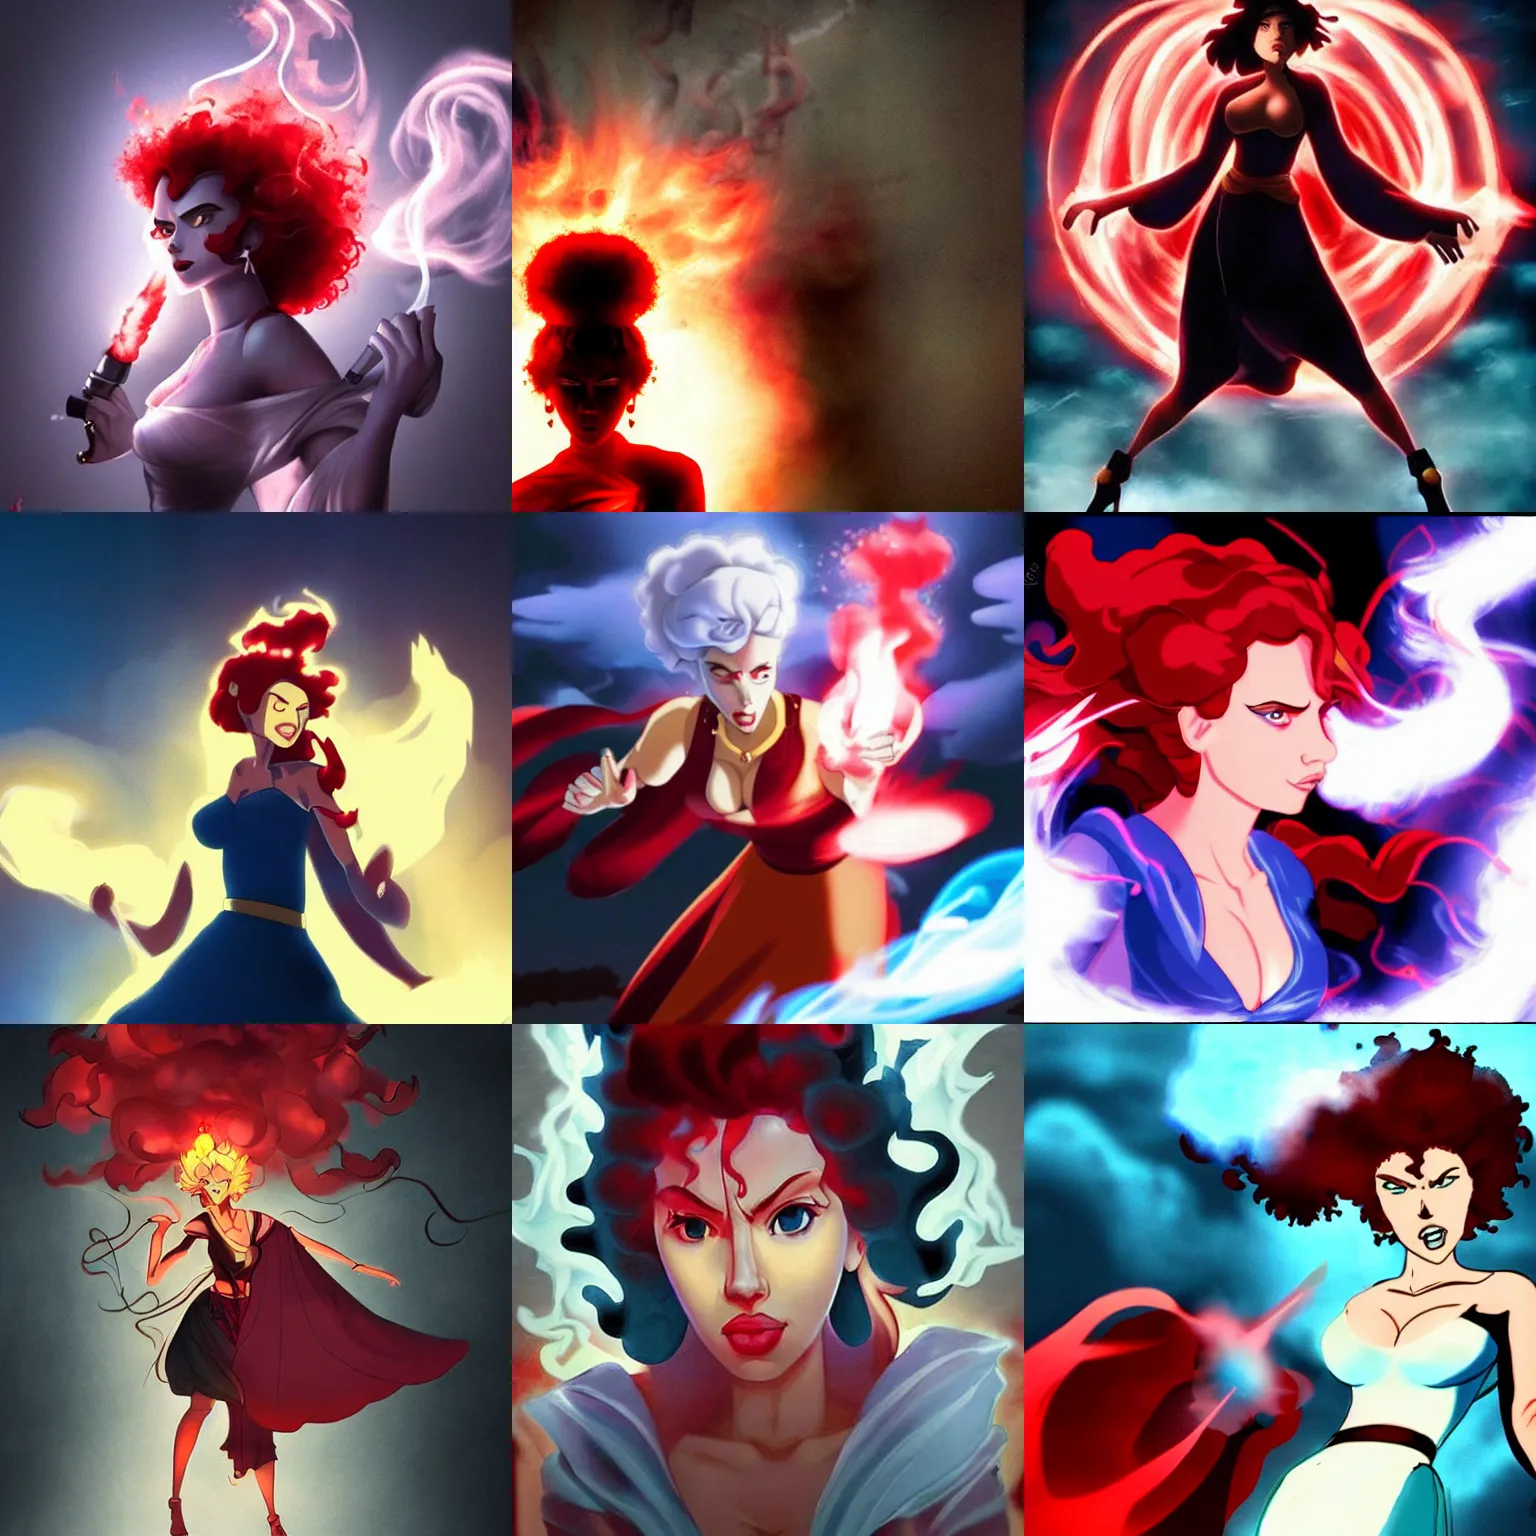 Prompt: angry scarlett johansson as a genie, red smoke coming from lamp, afro samurai anime style, dramatic lighting